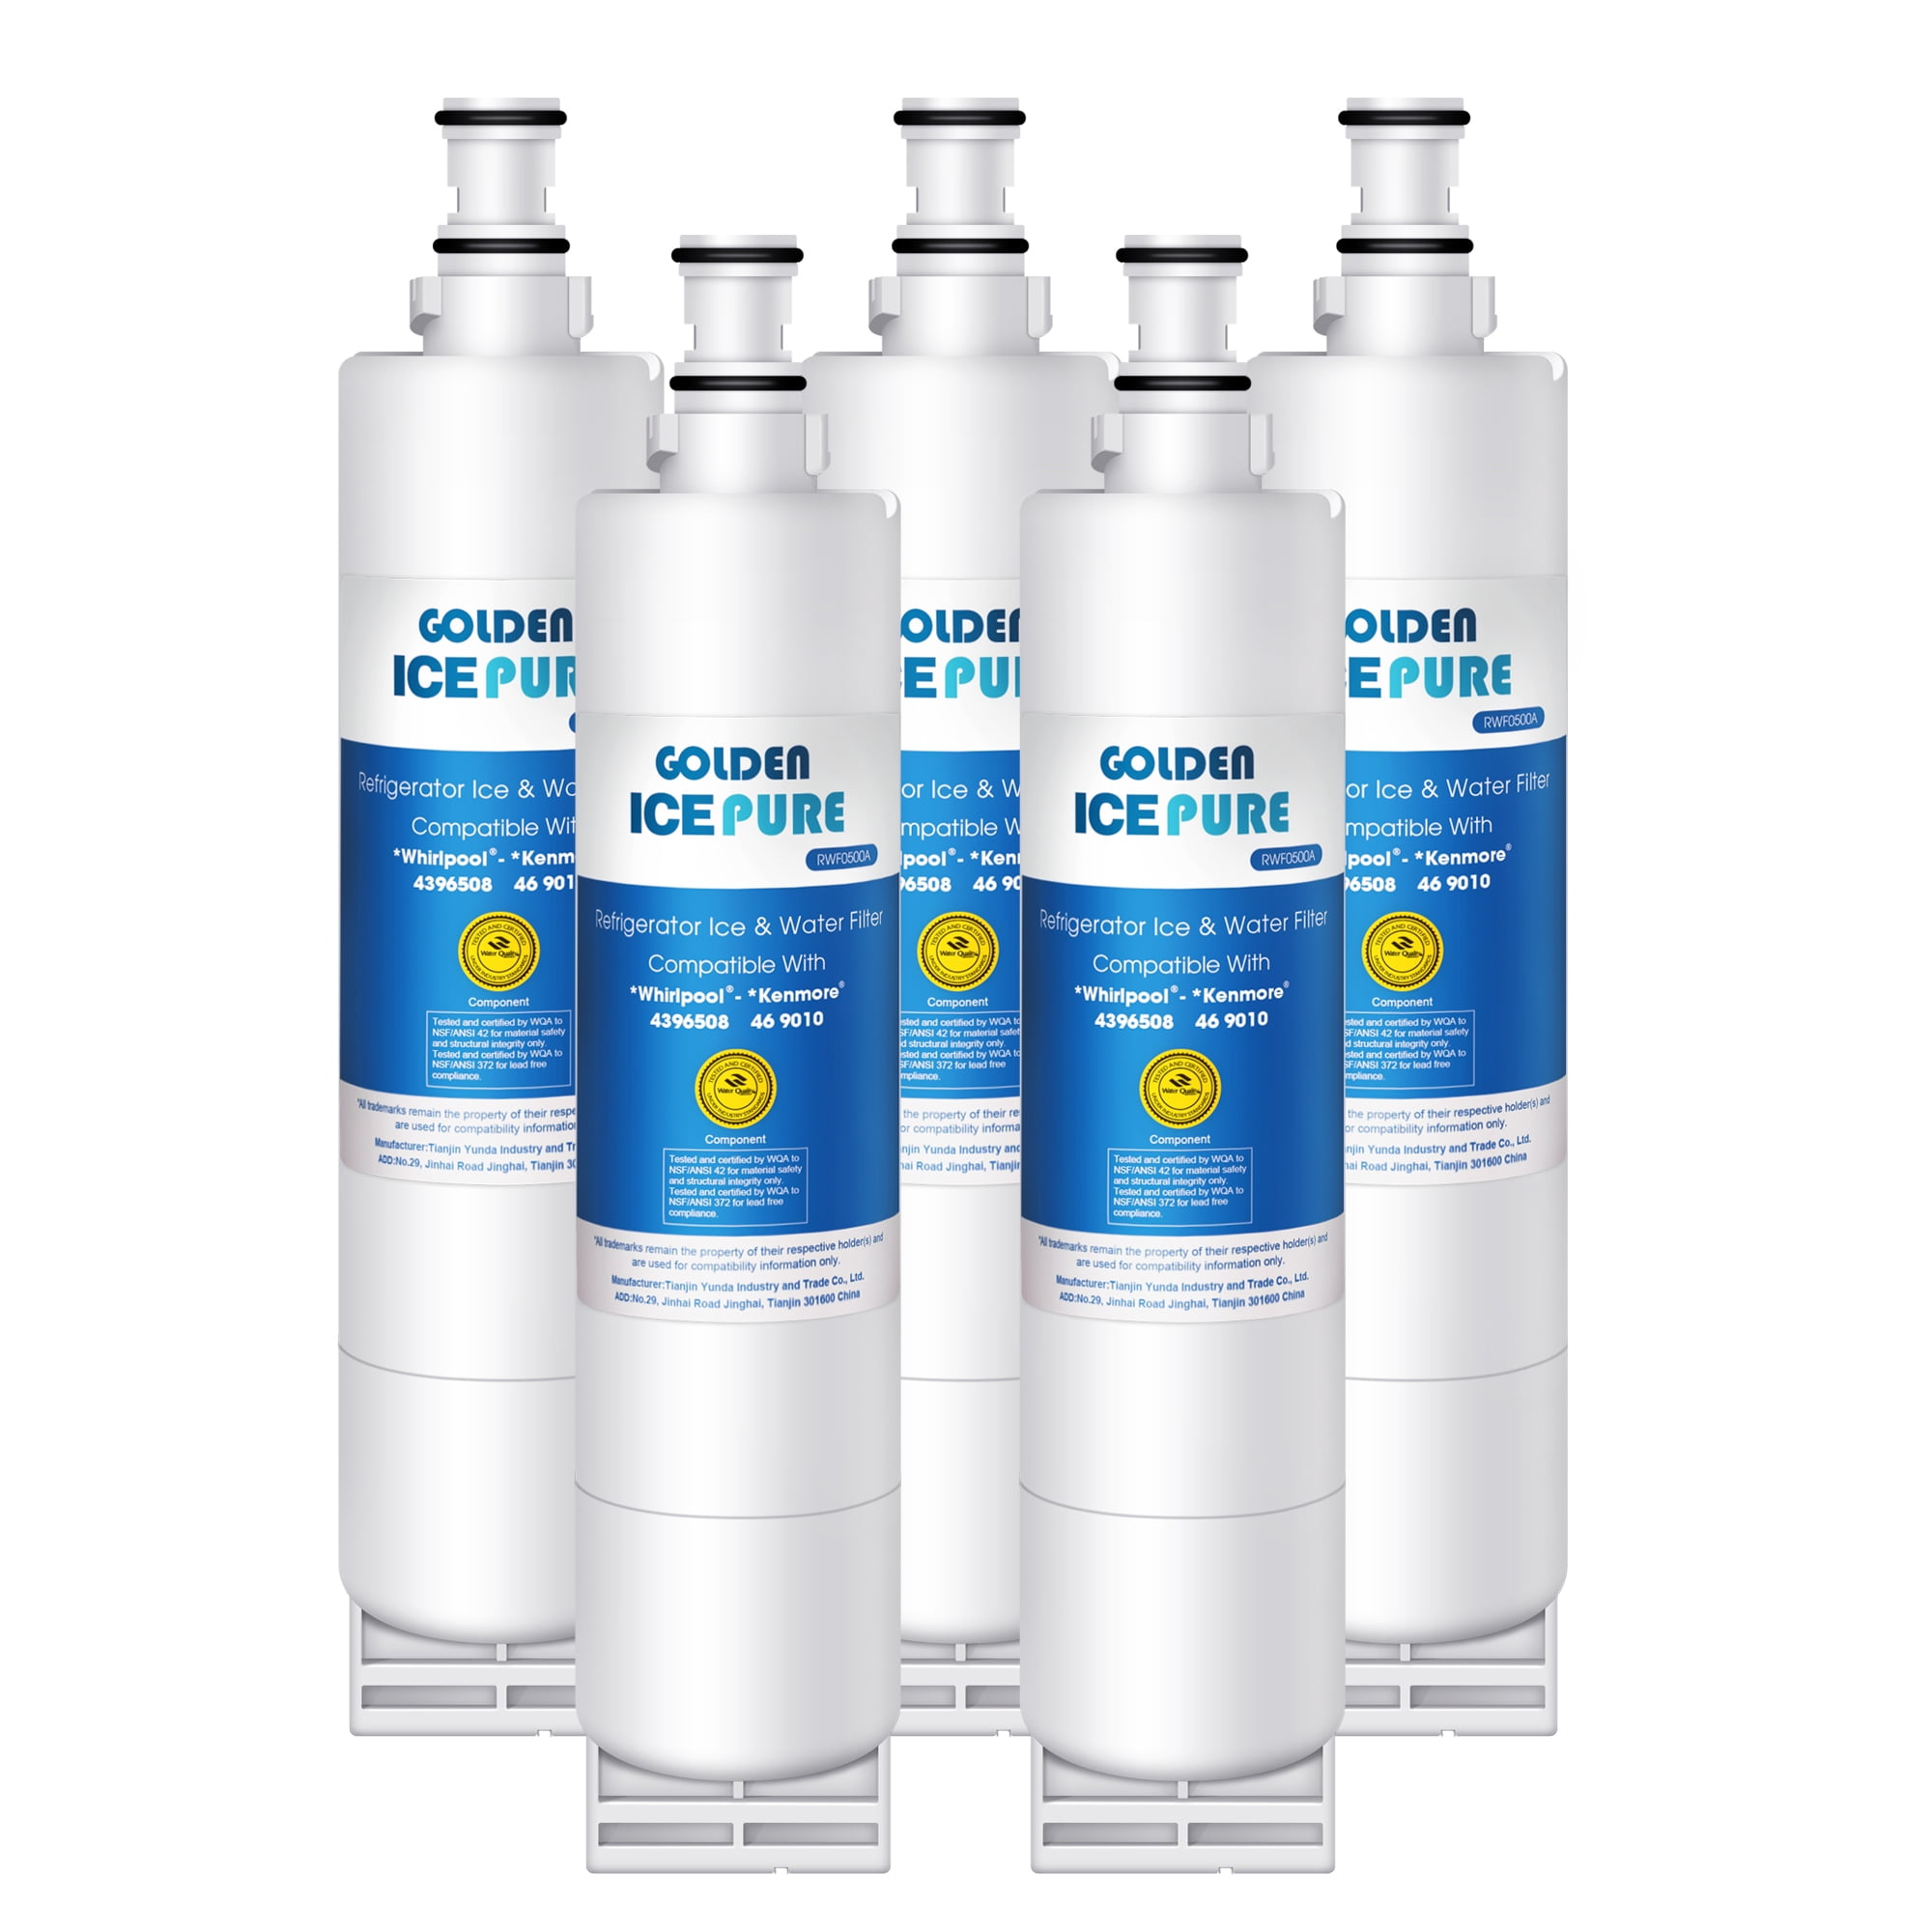 Kenmore Elite 9980 LT1000PC Refrigerator Water Filter Replacement for  MDJ64844601, ADQ74793501 LT1000PC ADQ74793502, Kenmore 46-9980, LFXS26973D  Ice and Water 3 Pack 